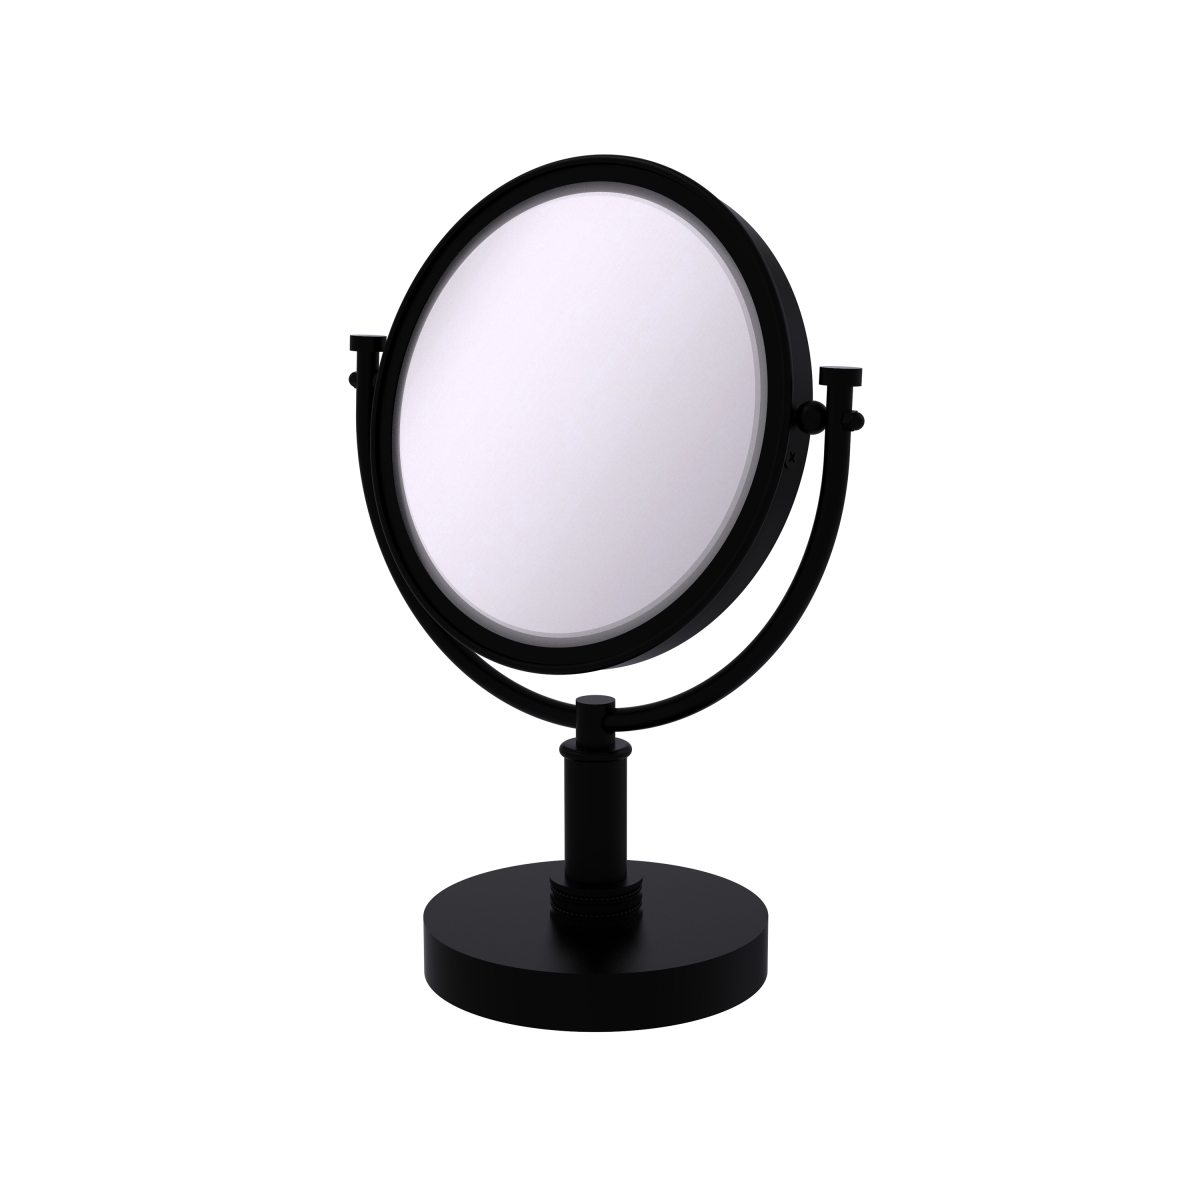 Dm-4d-5x-bkm Dotted Ring Style 8 In. Vanity Top Make-up Mirror 5x Magnification, Matte Black